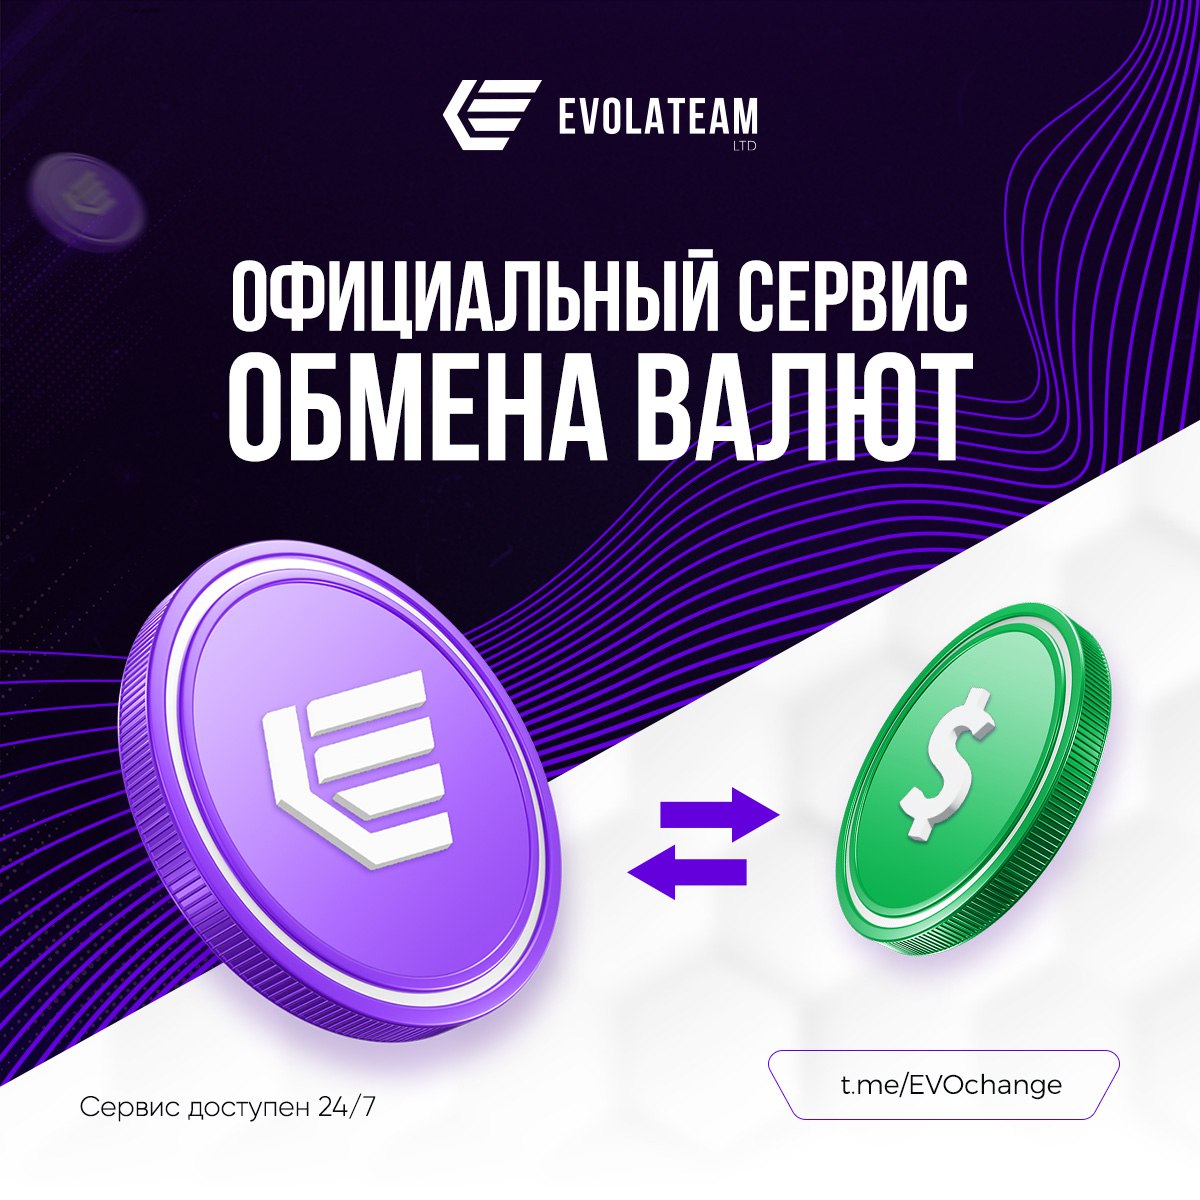 Official exchange service